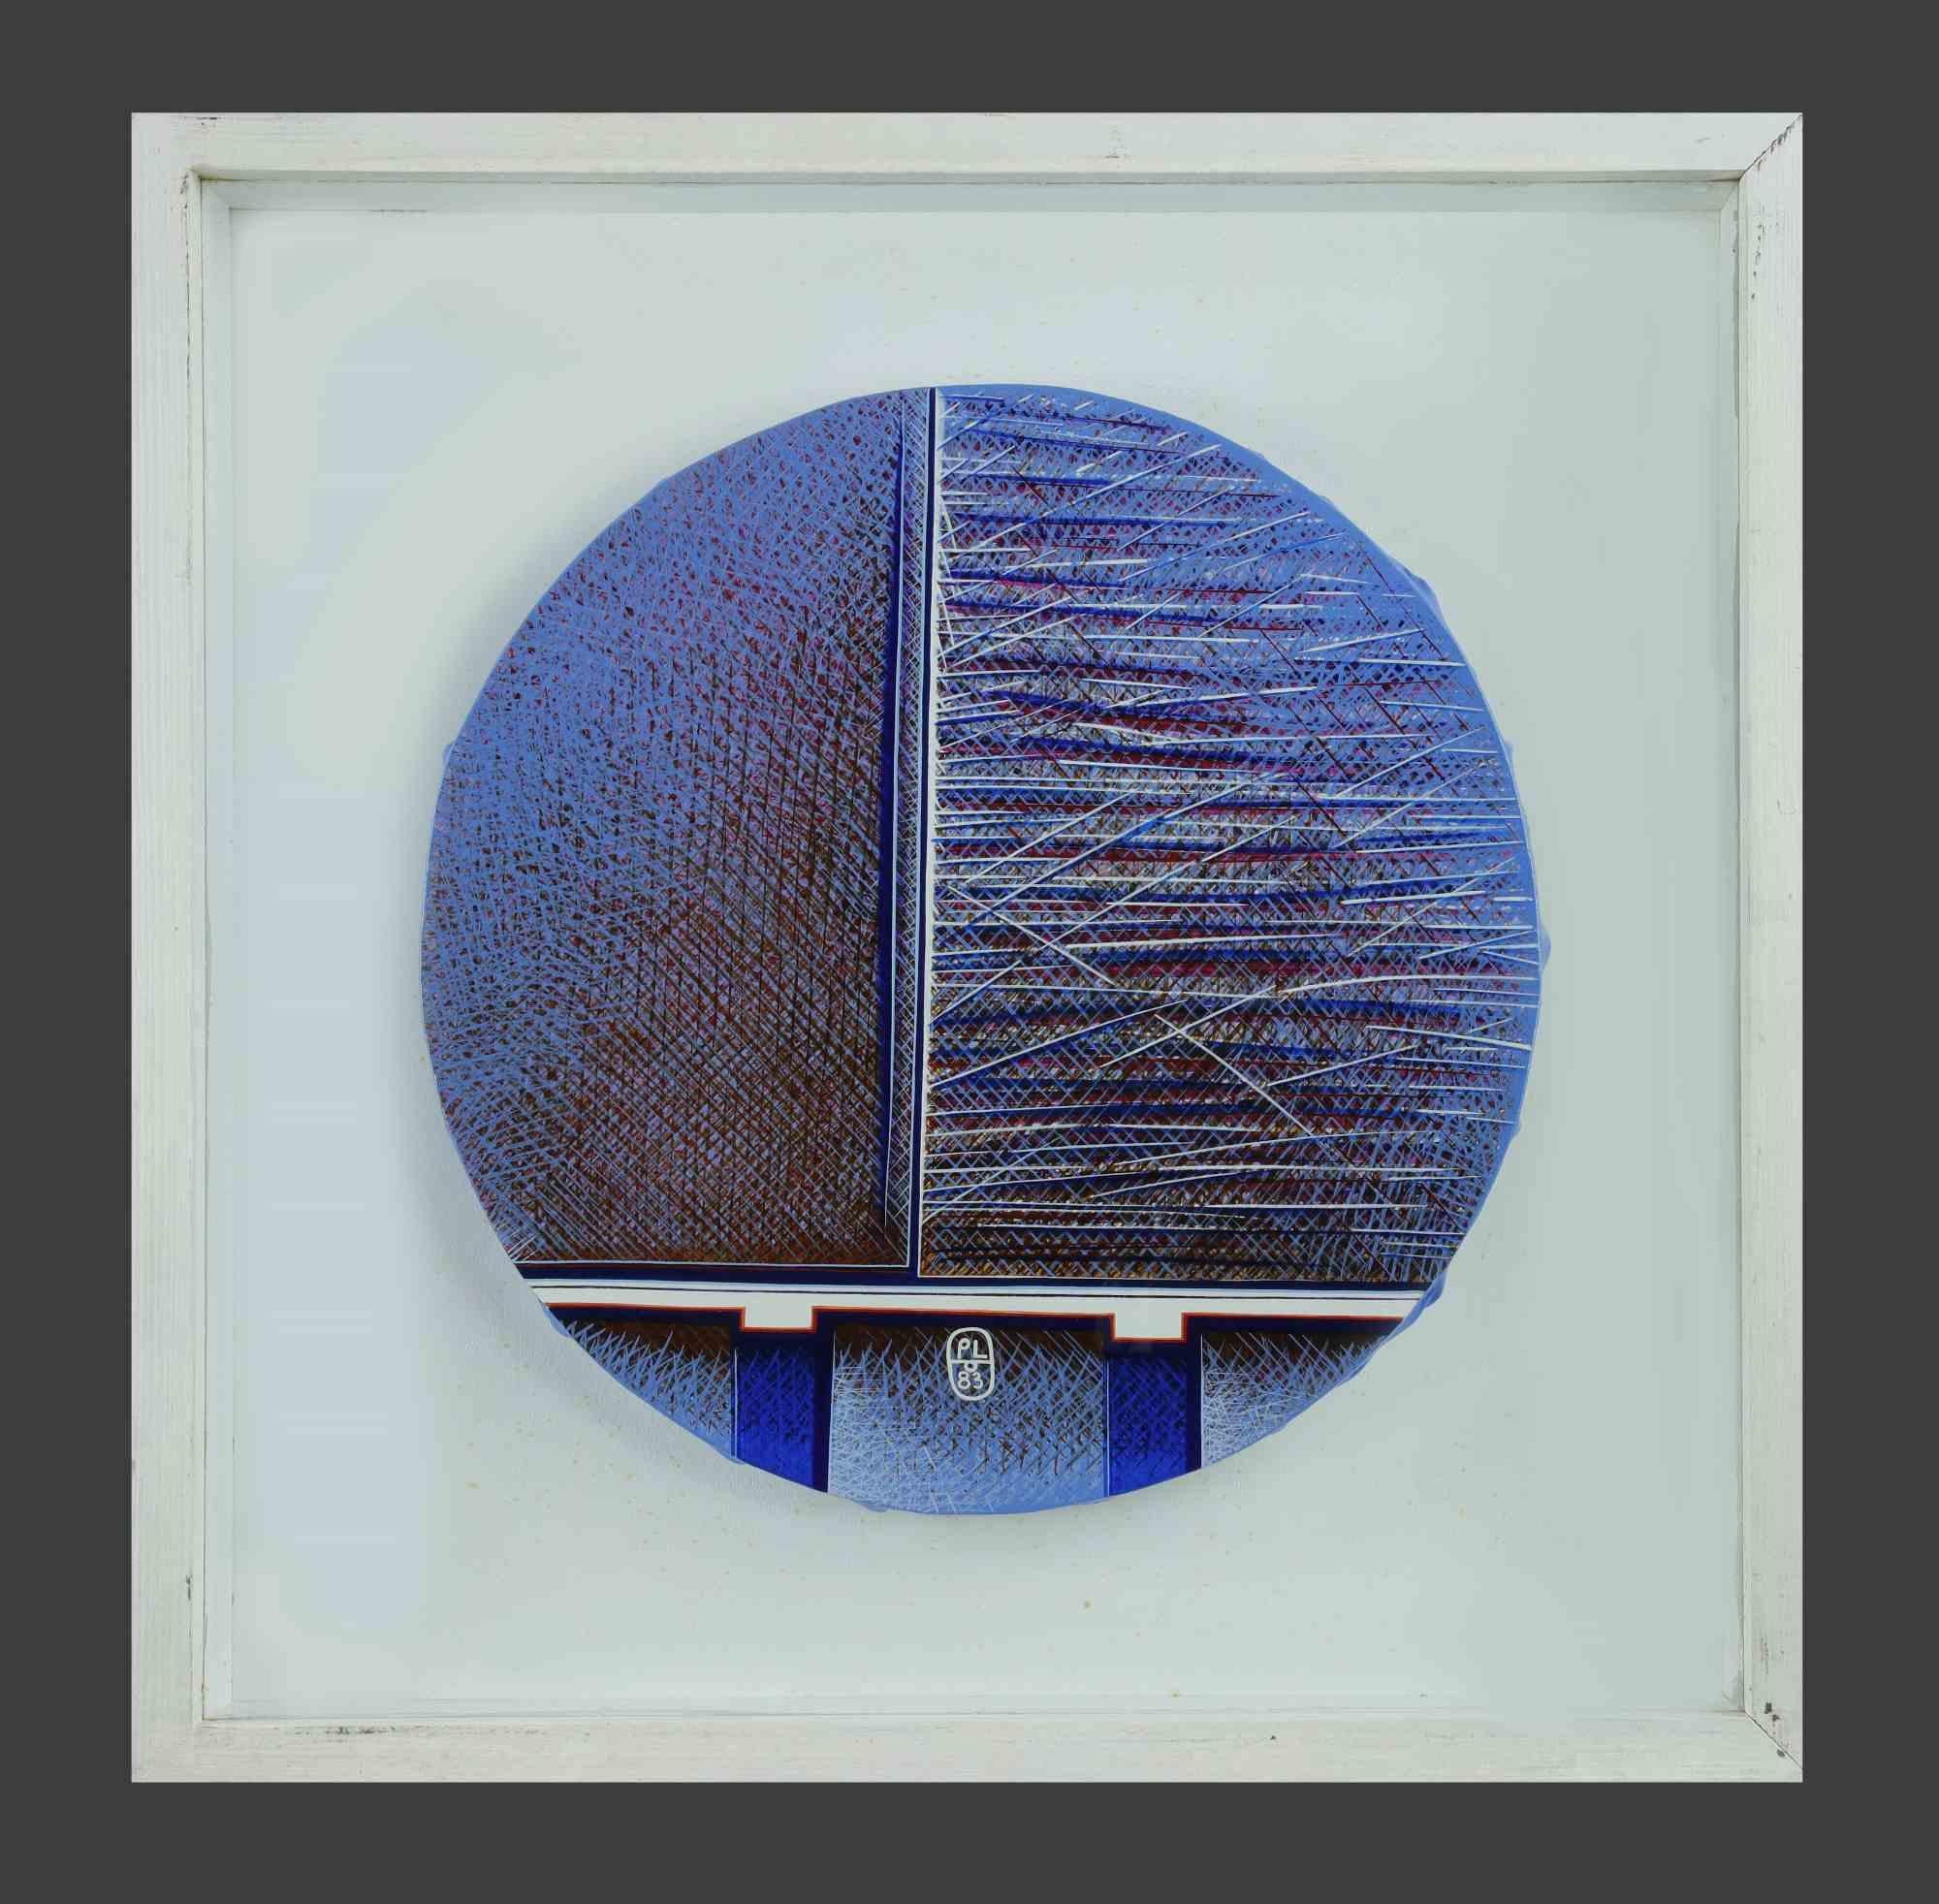 Composition - Original Mixed Media by Patrice Lavaud - 1983